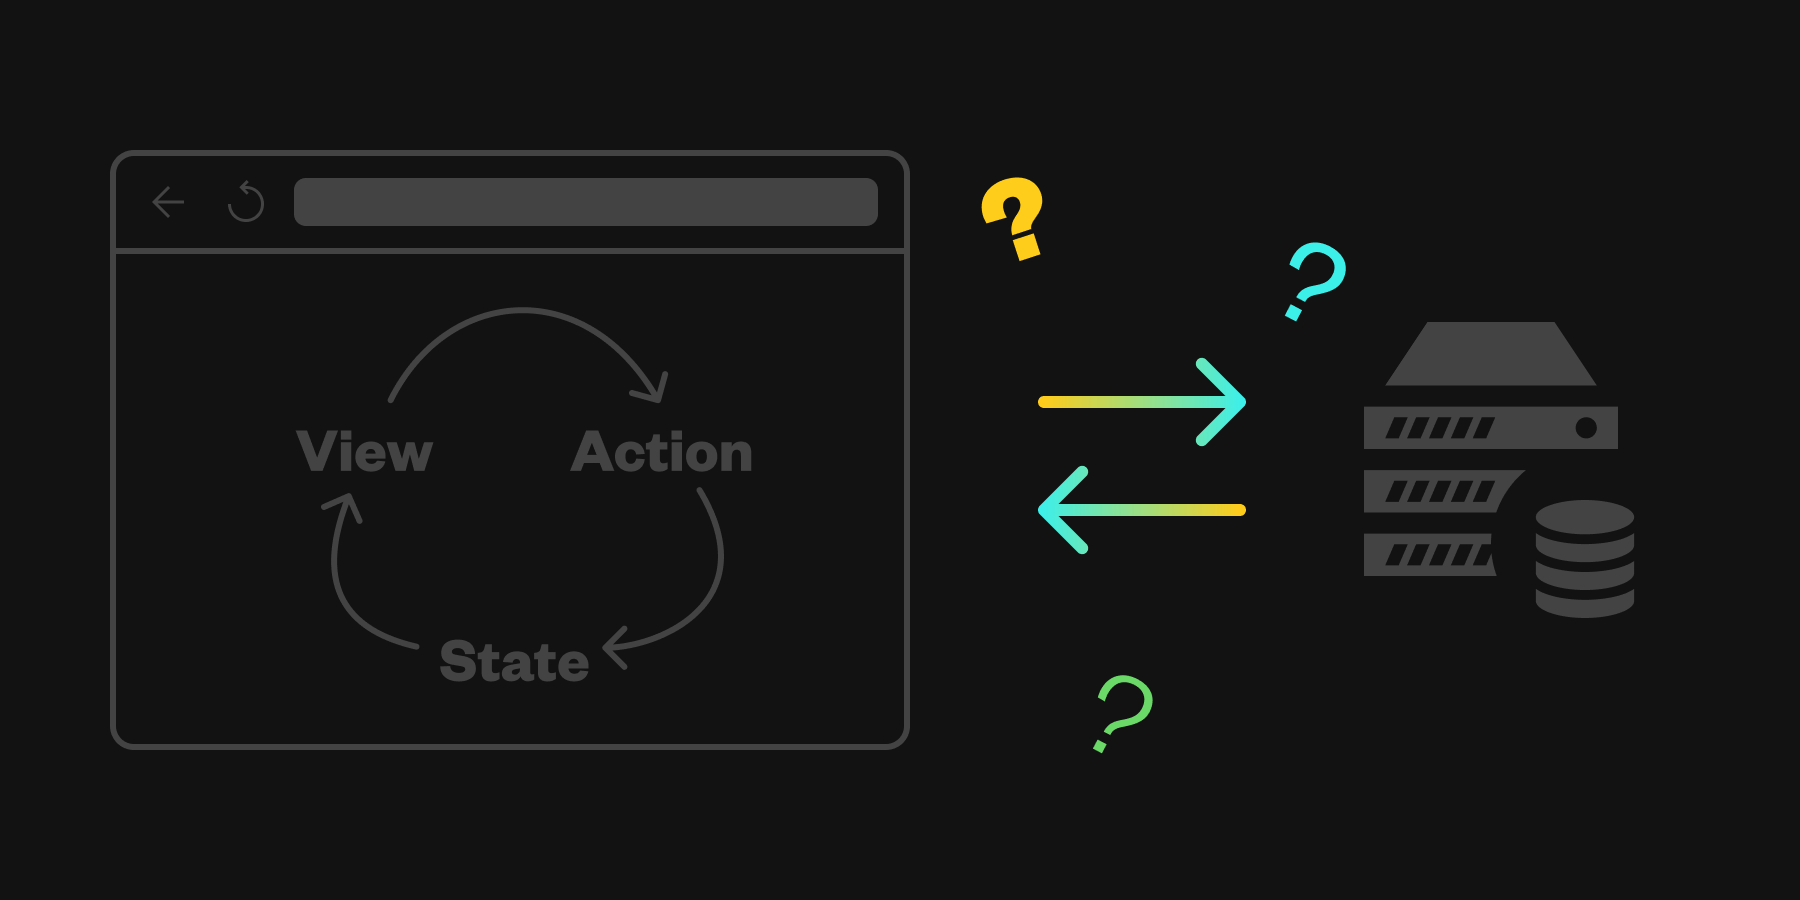 Illustration of the flow “View -> Action -> State” framed in a browser on the left. On the right is an illustartion of a server with a database. Two arrows connect these two illustrations denoting network transfer. The visual emphasis is on the network part of the graphic with “?”s surrounding it.